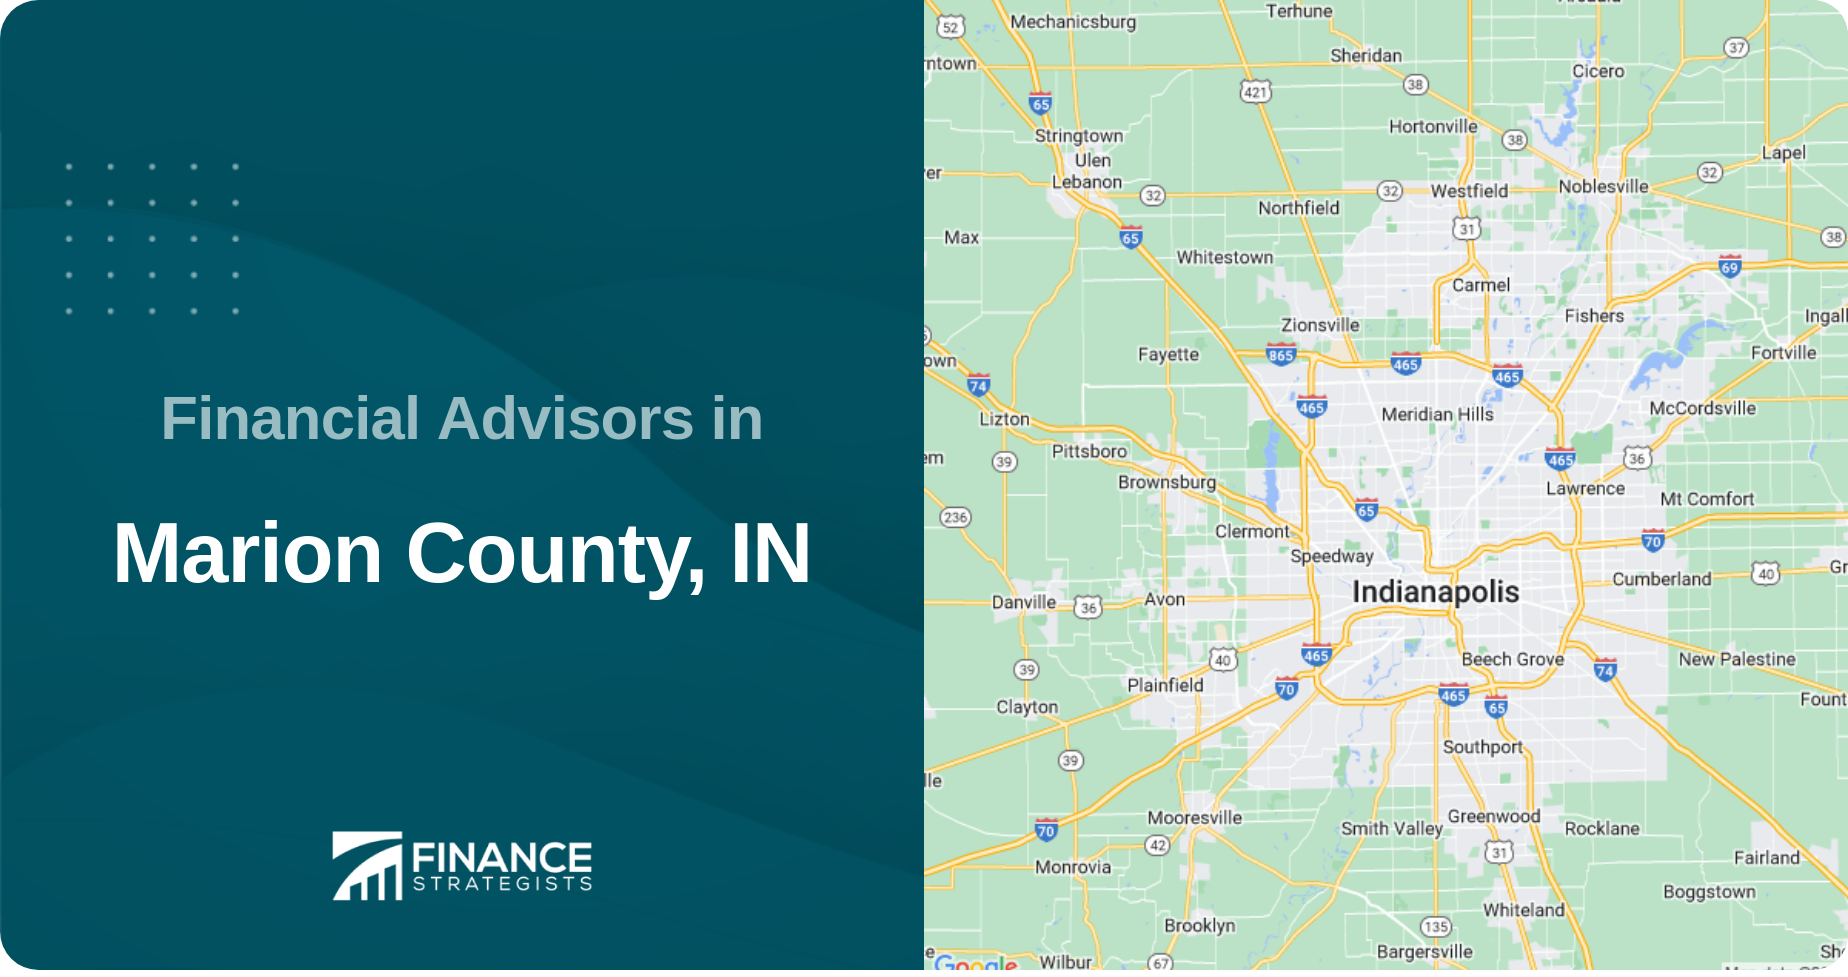 Financial Advisors in Marion County, IN